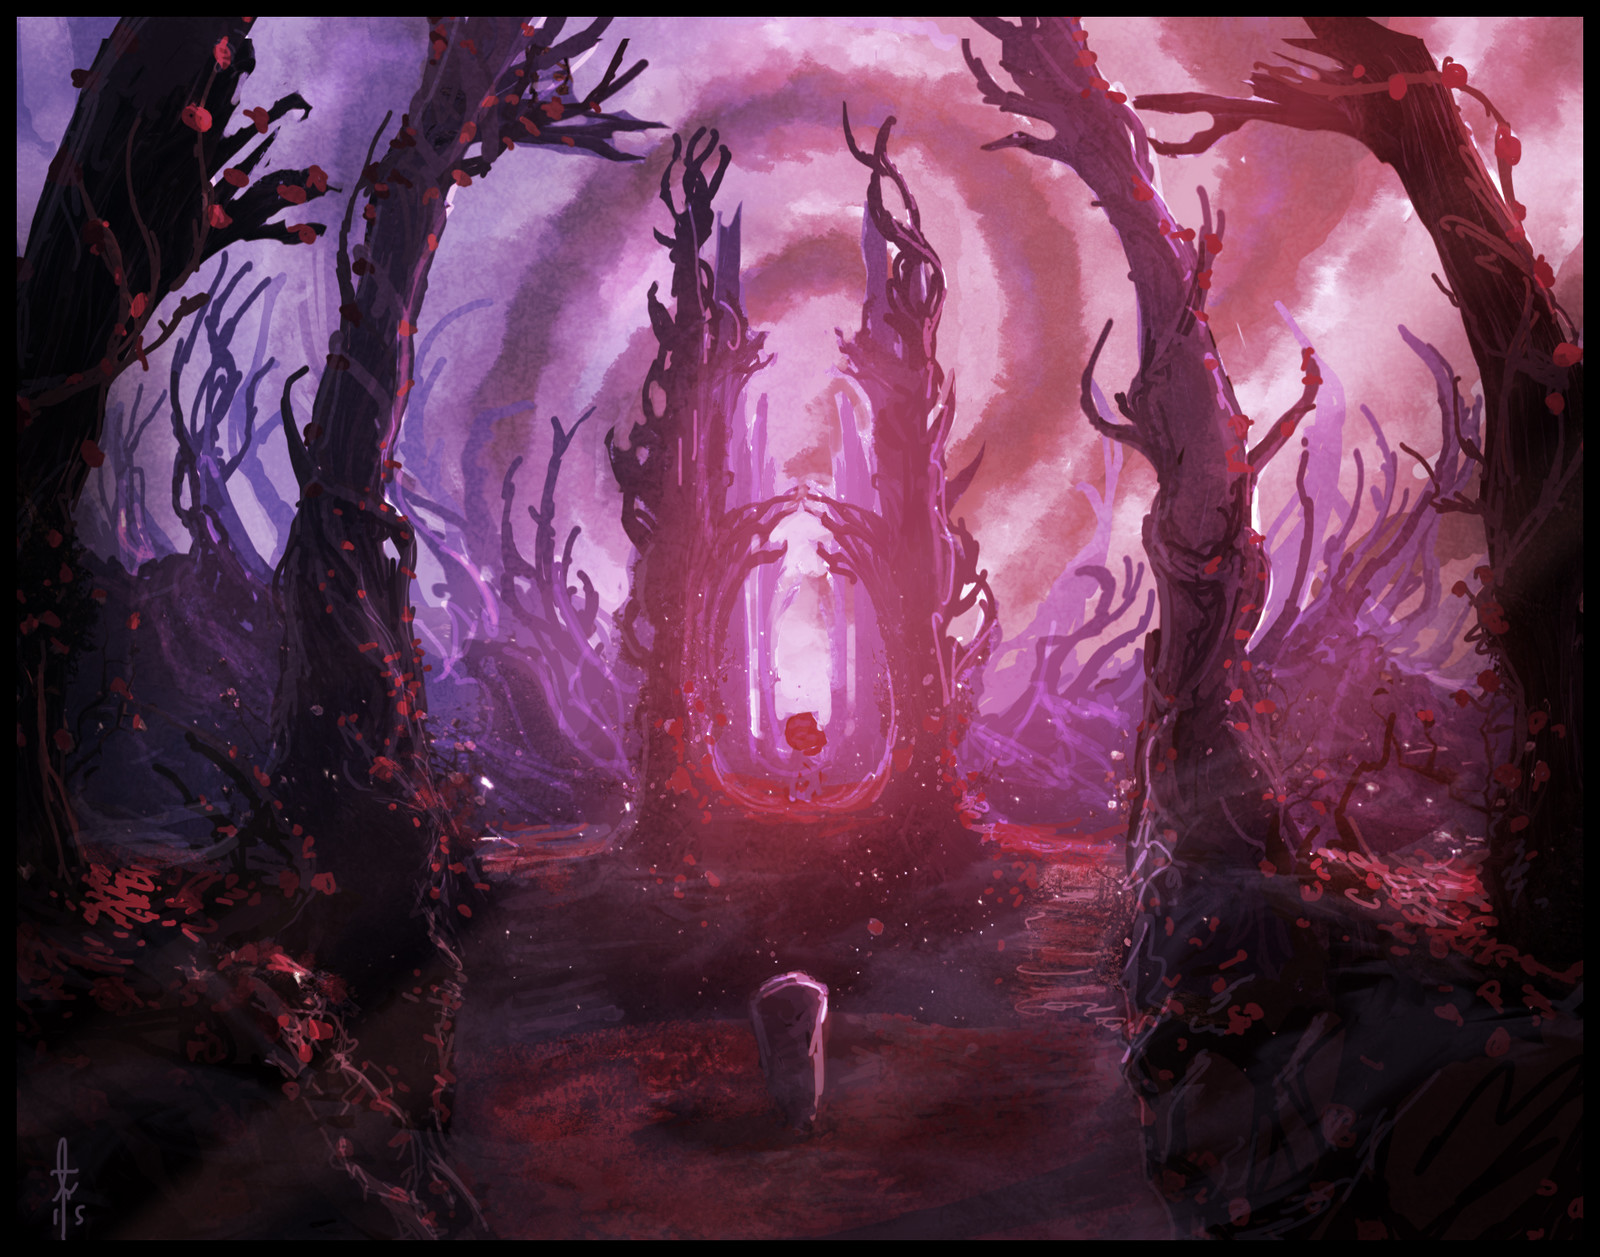 "Fable Legends" Environment exploration. "Red Queen",  done in Photoshop.